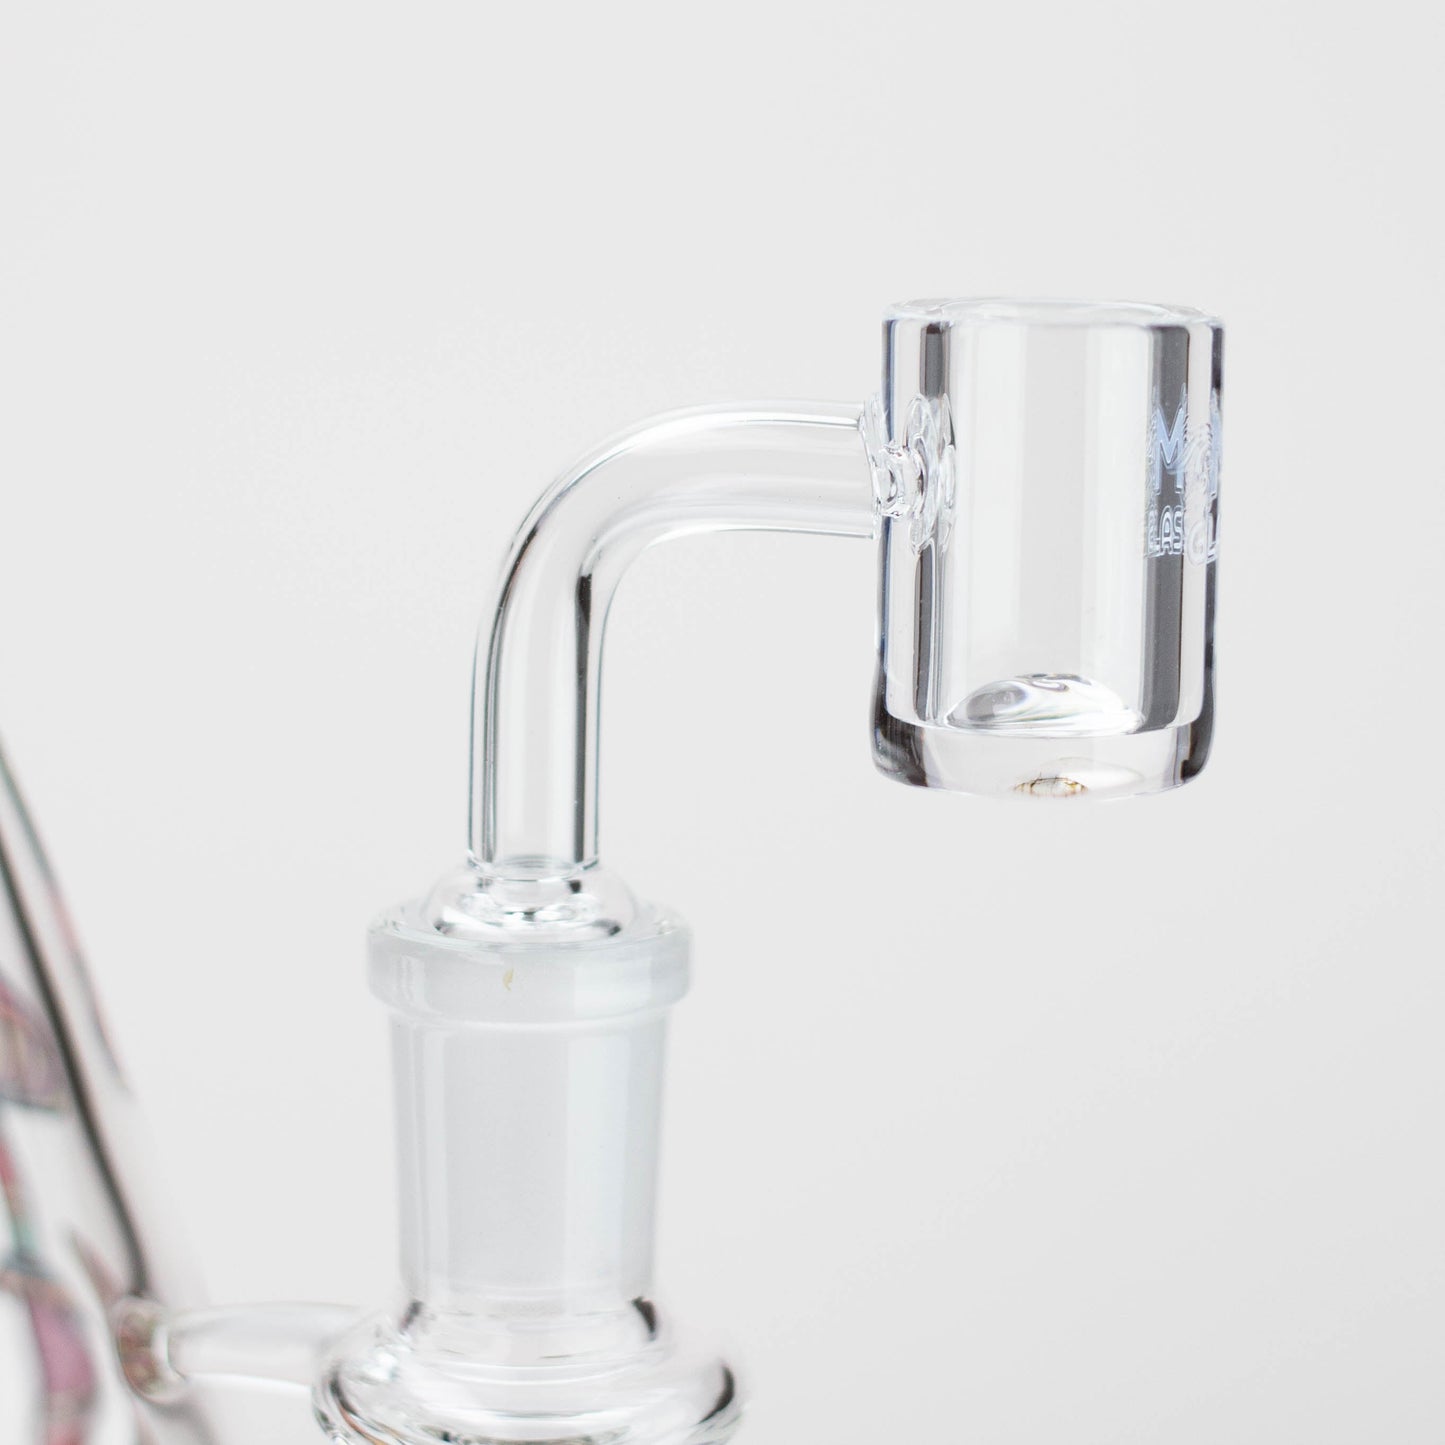 4.5" MGM Glass 2-in-1 bubbler with Graphic [C2672]_5